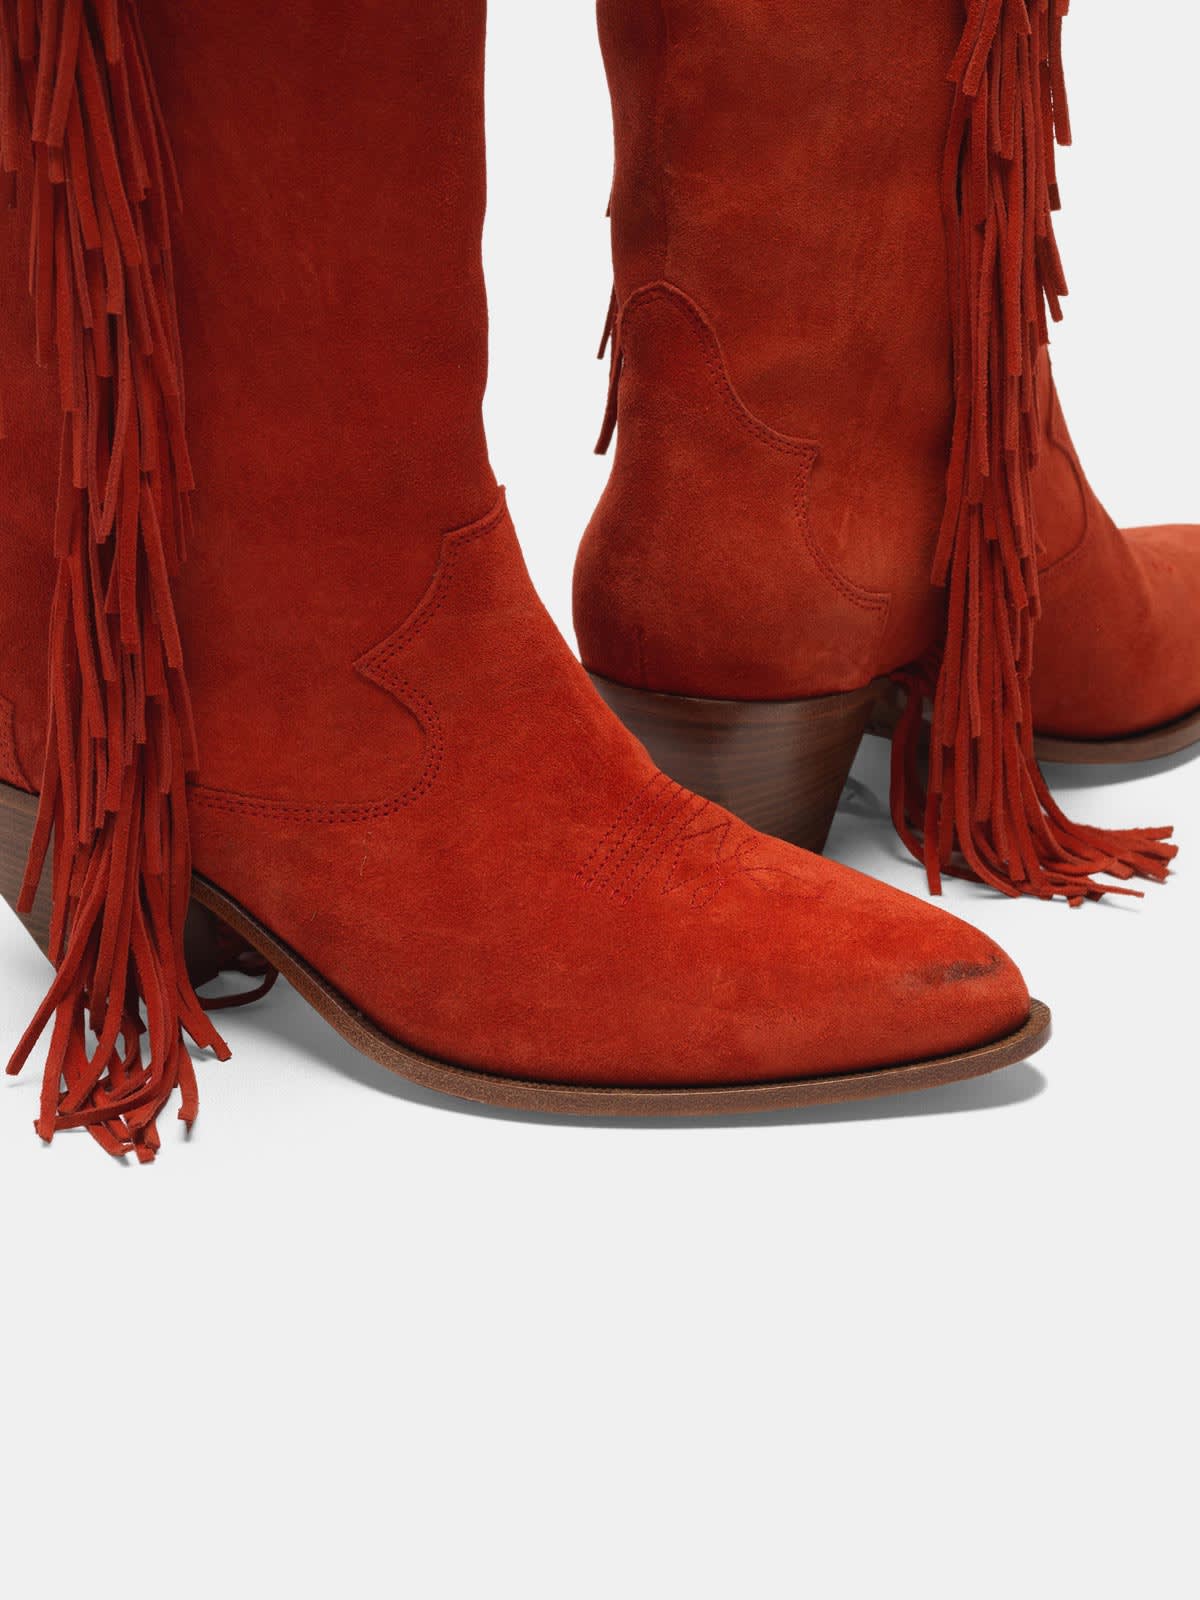 Levriero ankle boots in suede leather with fringes